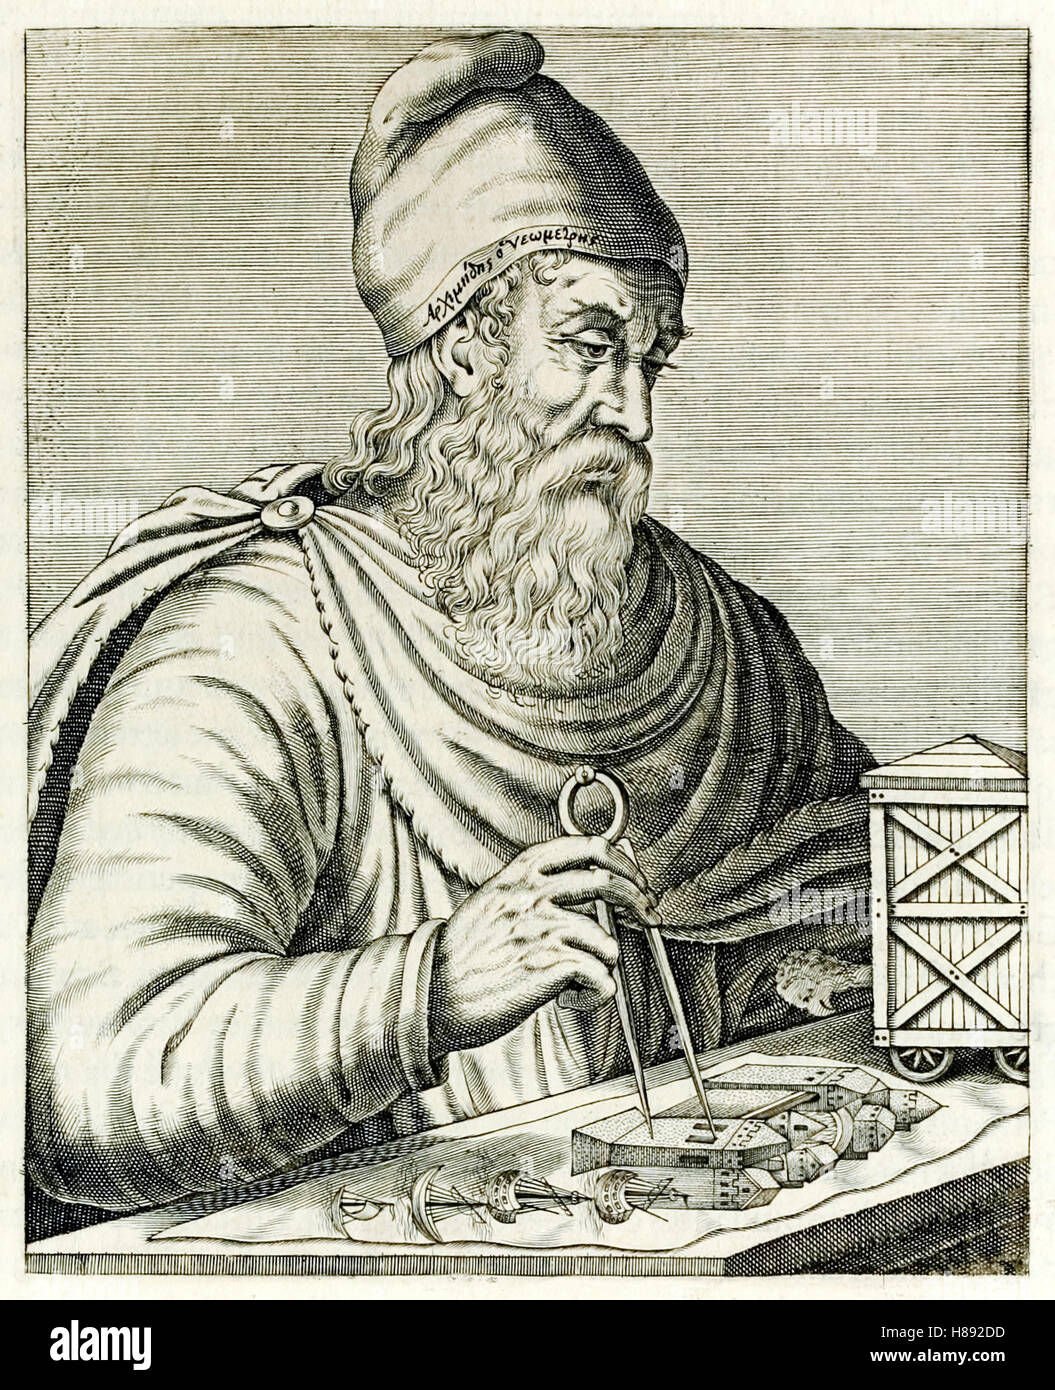 Archimedes of Syracuse (287-212BC) Ancient Greek mathematician, physicist, engineer, inventor, and astronomer from “True Portraits…” by André Thévet published in 1584. See description for more information. Stock Photo